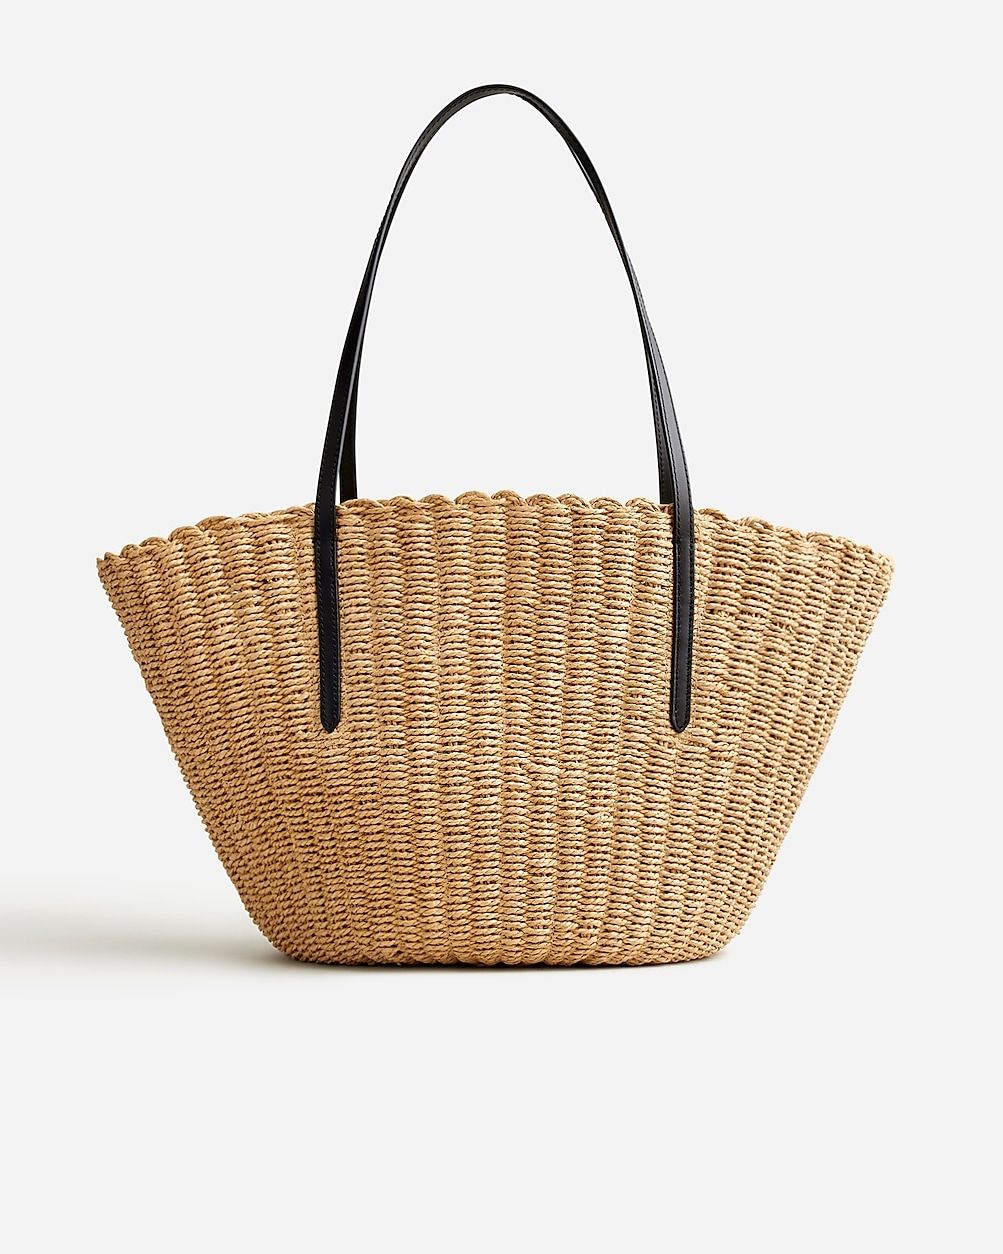 best seller4.9(24 REVIEWS)Como woven straw tote$118.00Select Colors$89.50Natural Straw$89.50One S... | J.Crew US